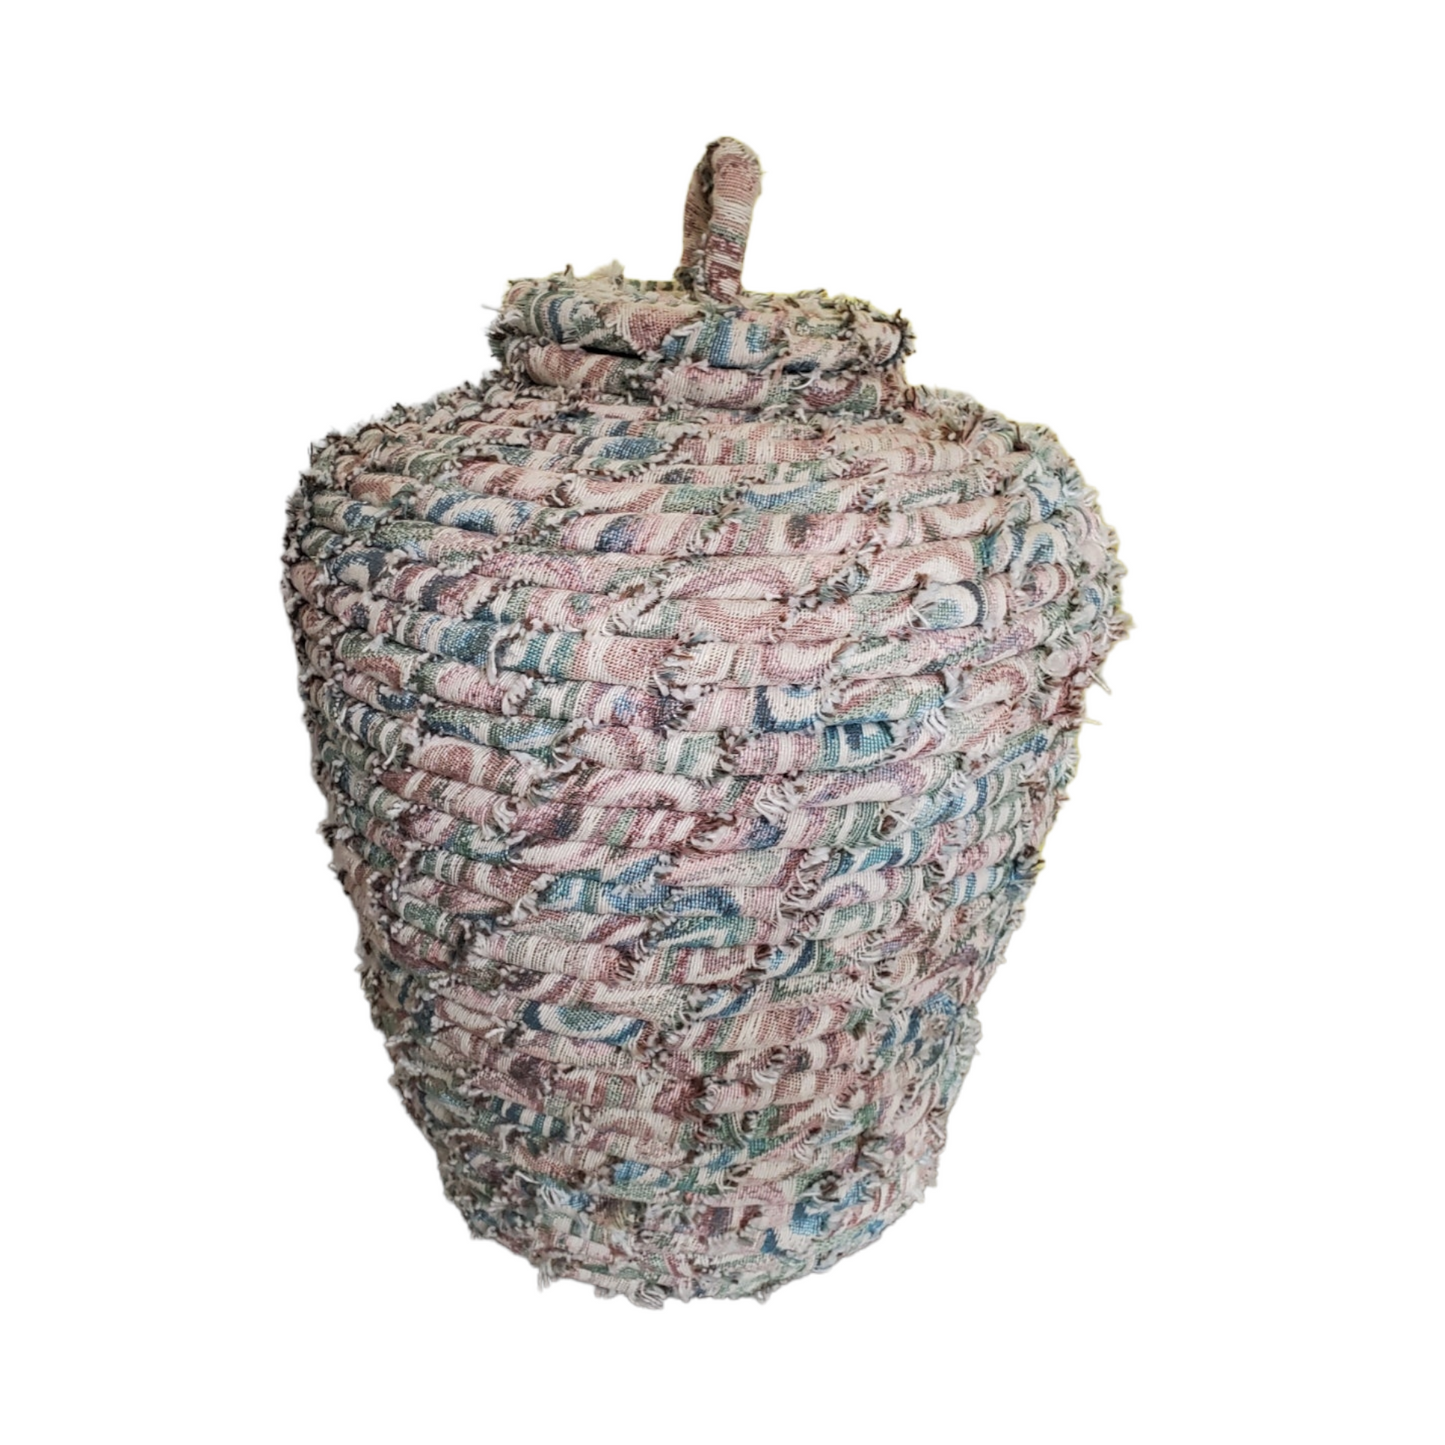 90's Handmade Coiled Fabric Basket with Lid